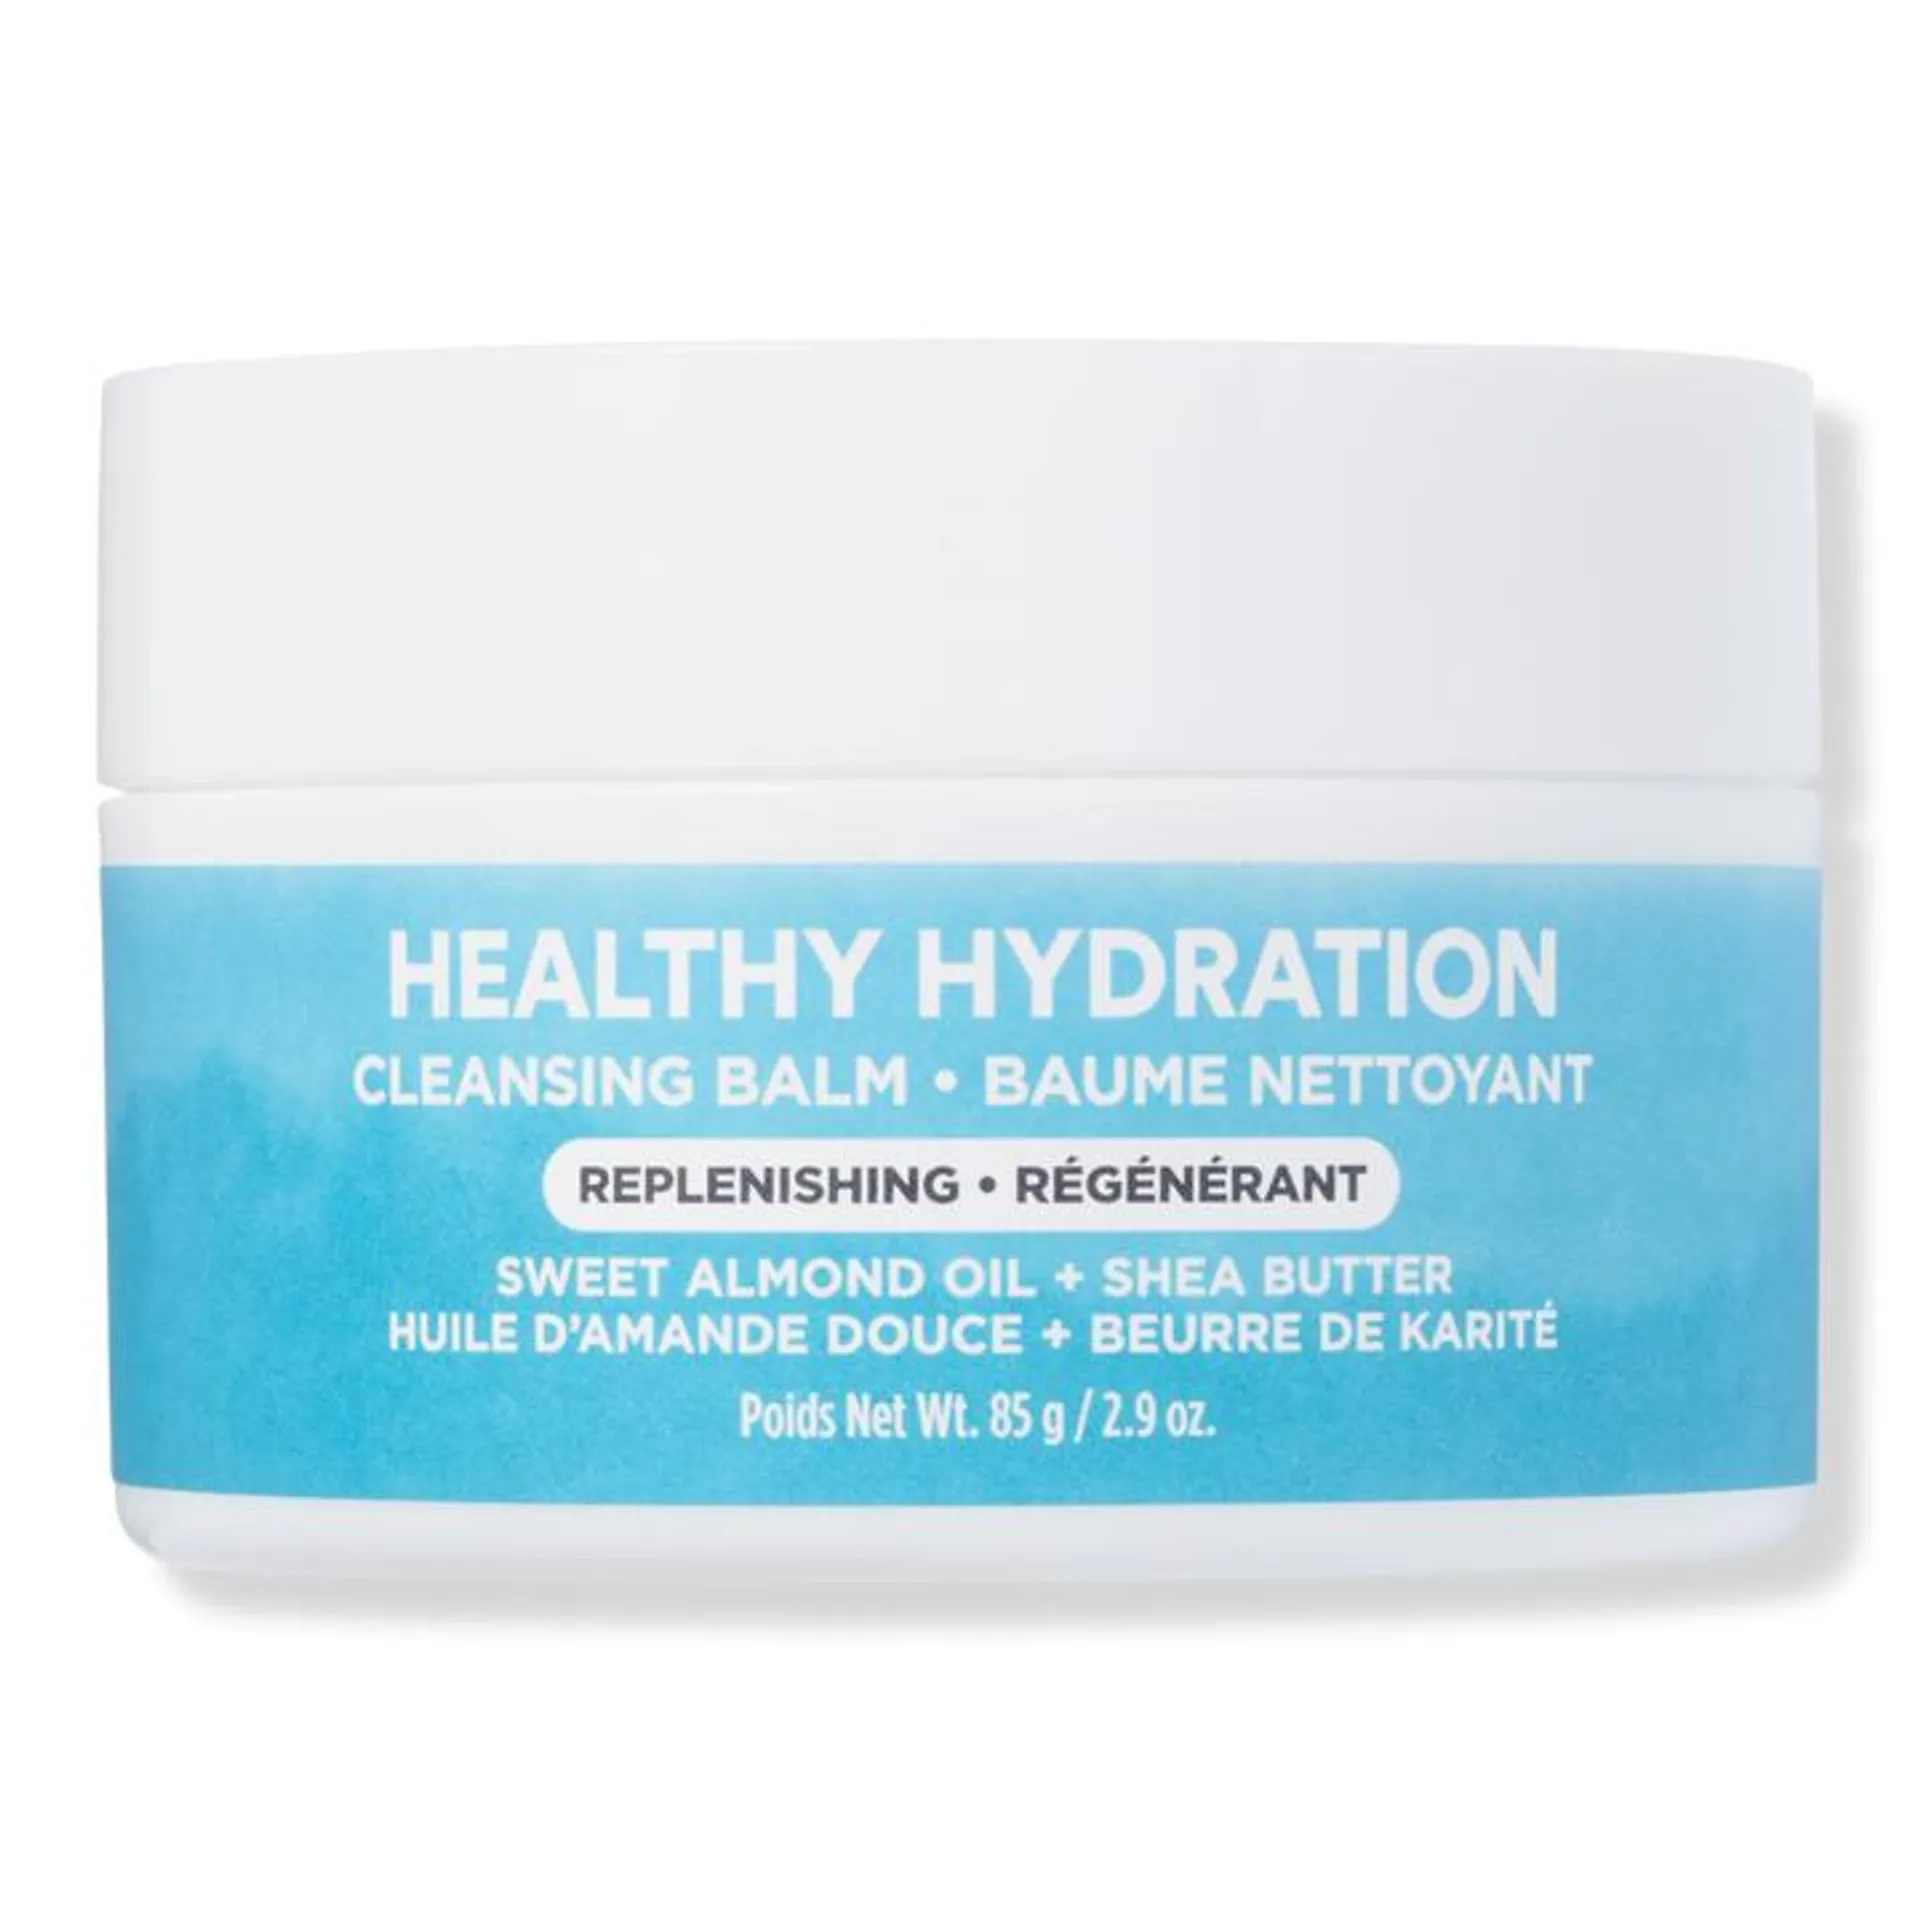 Healthy Hydration Cleansing Balm